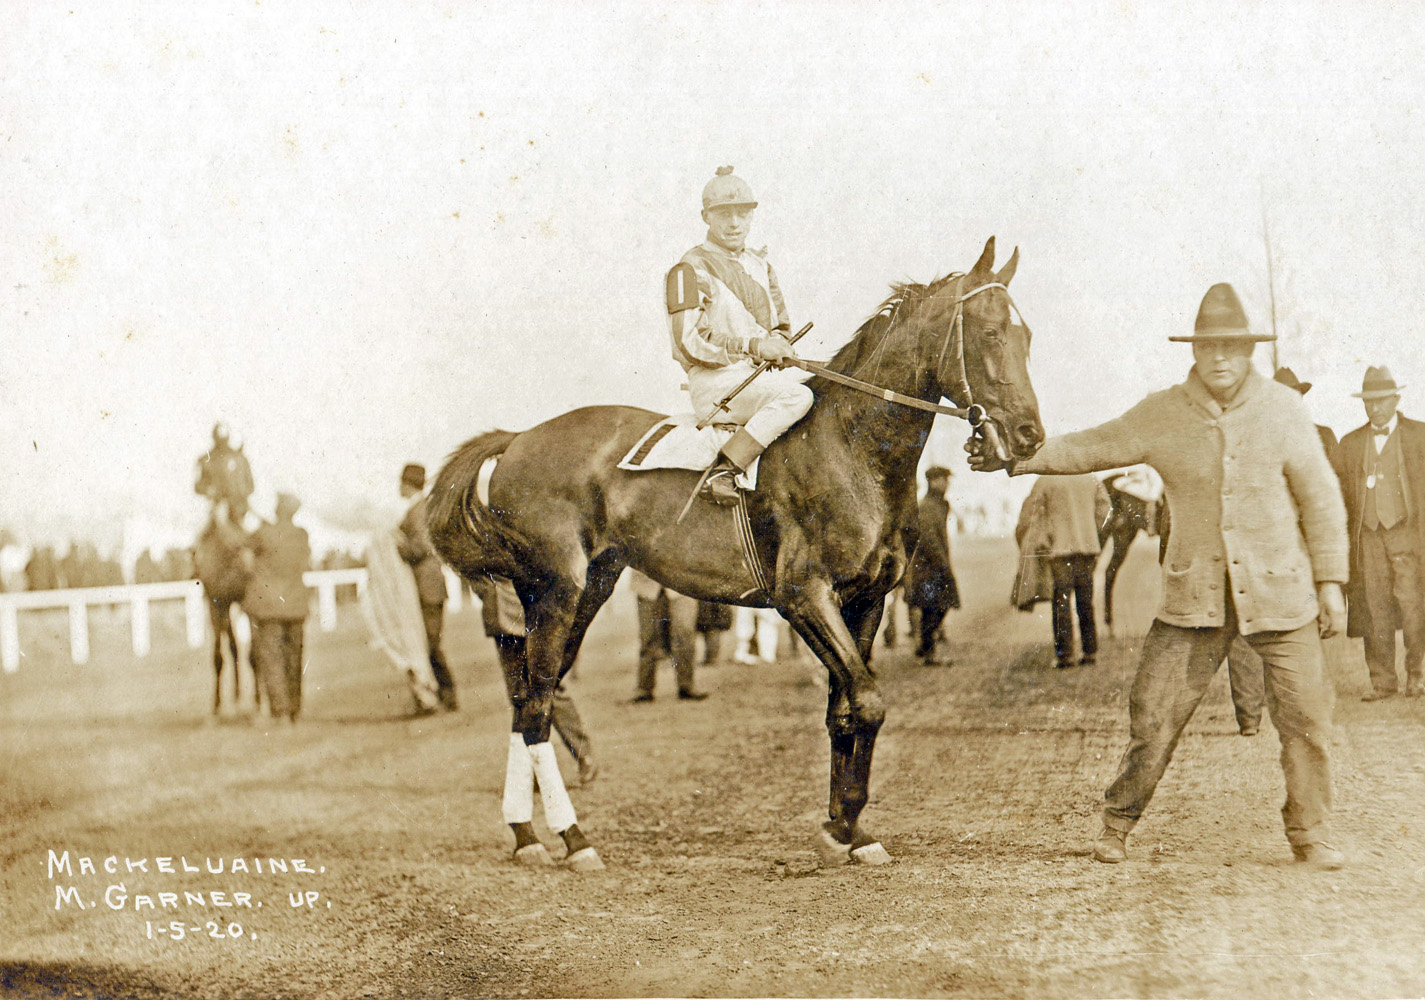 Mack Garner and Mackelvaine in the winner's circle at New Orleans (Museum Collection)